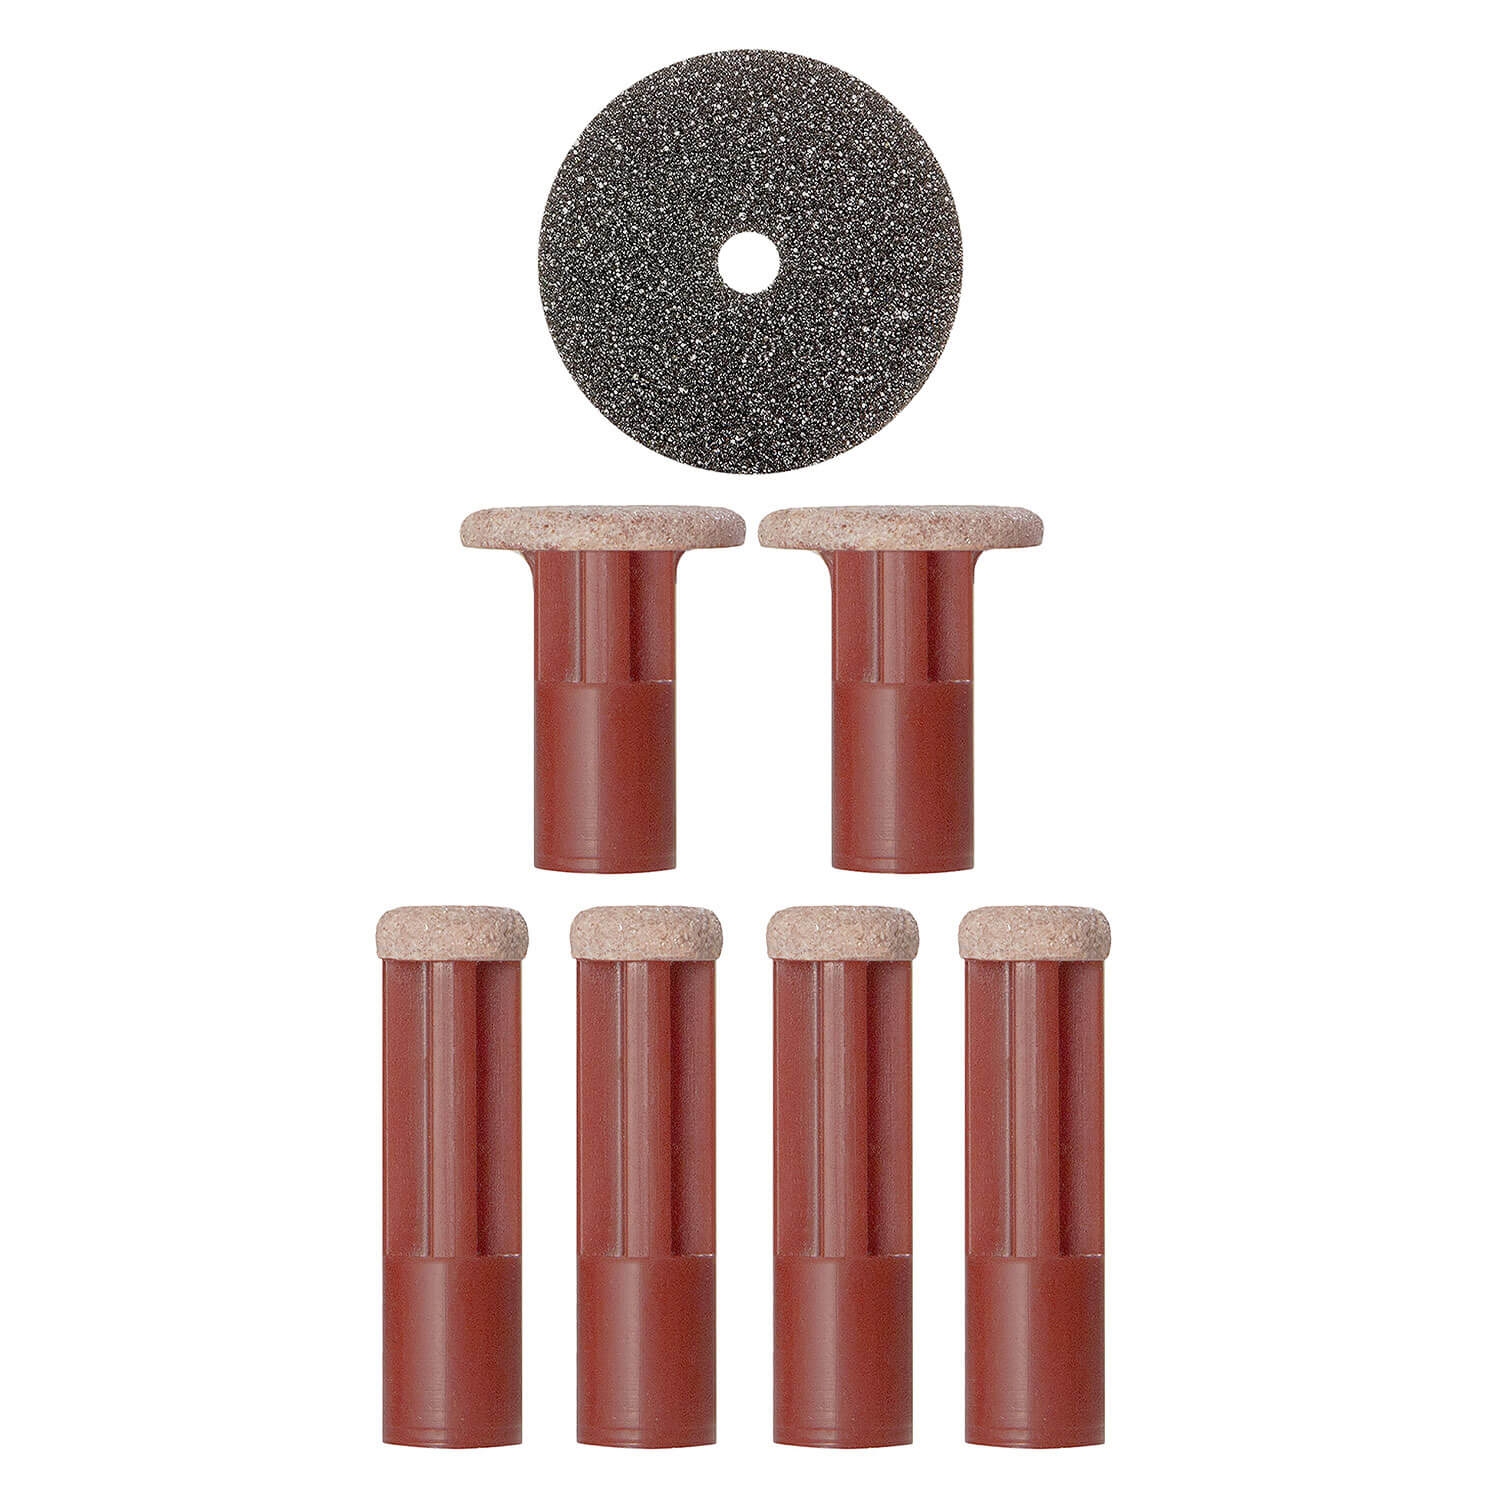 Product image from pmd - Replacement Discs Very Coarse